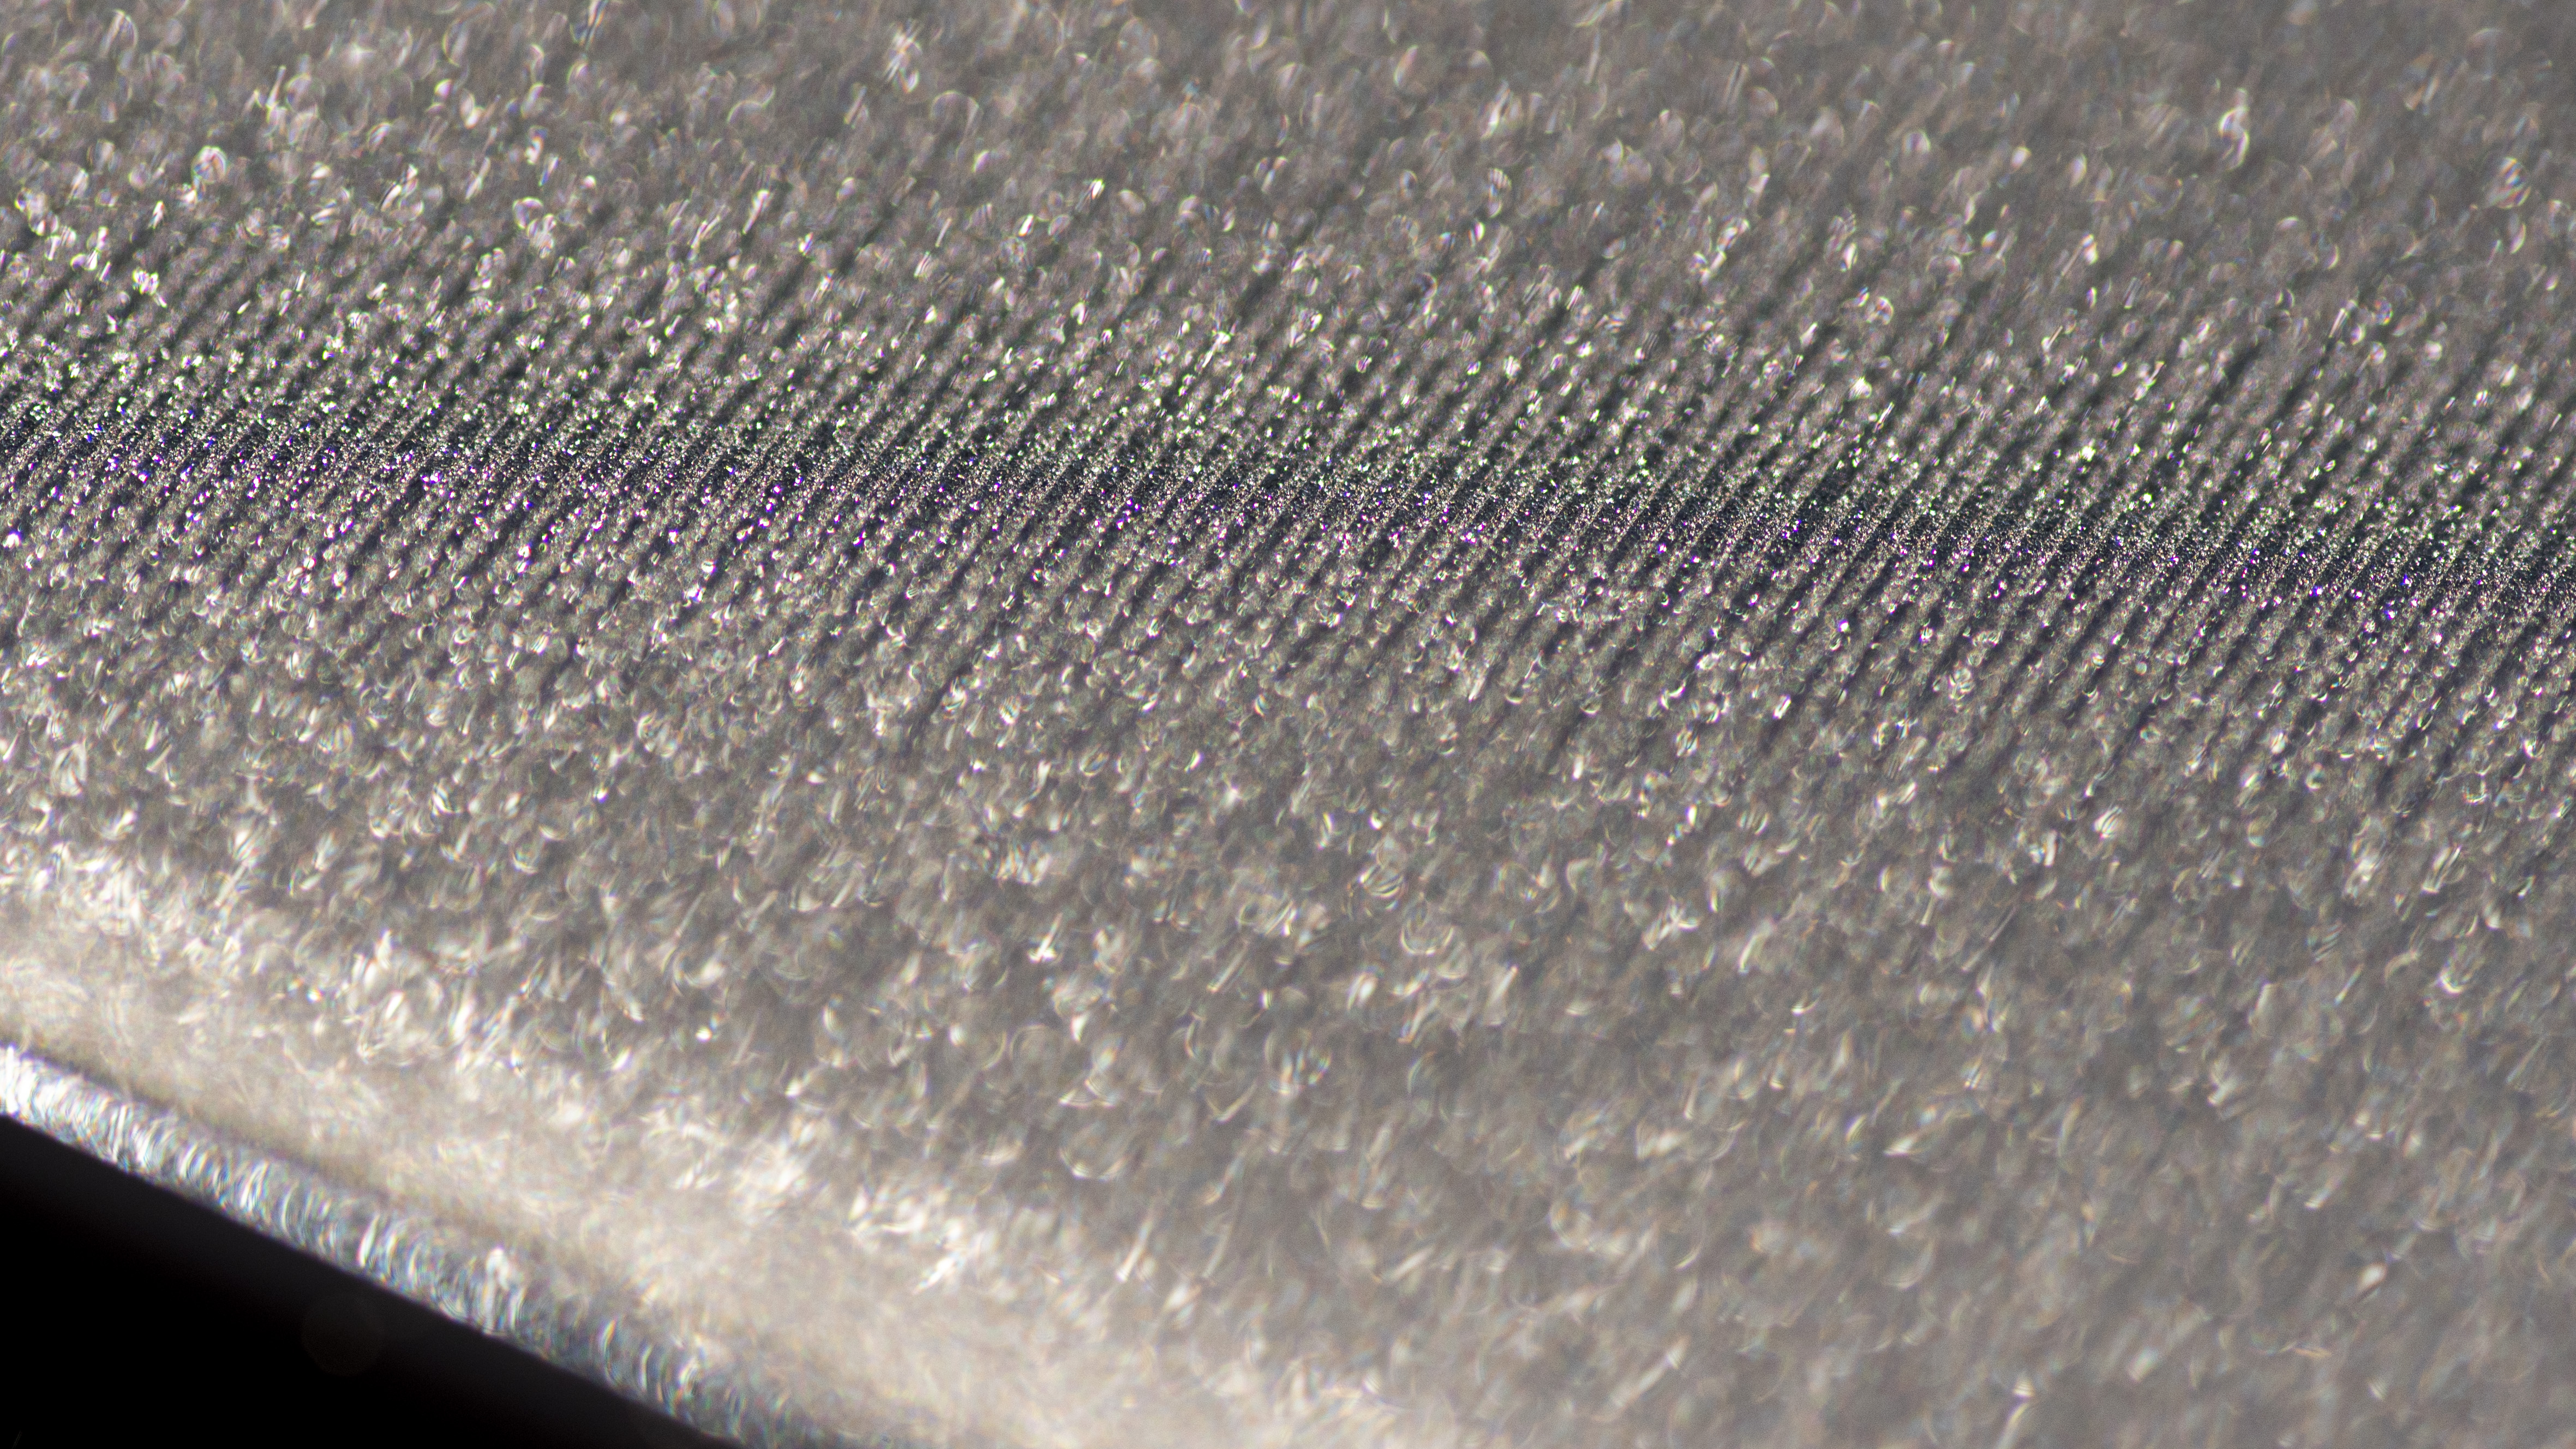 Macro image of the moonstone black color showing ripple texture